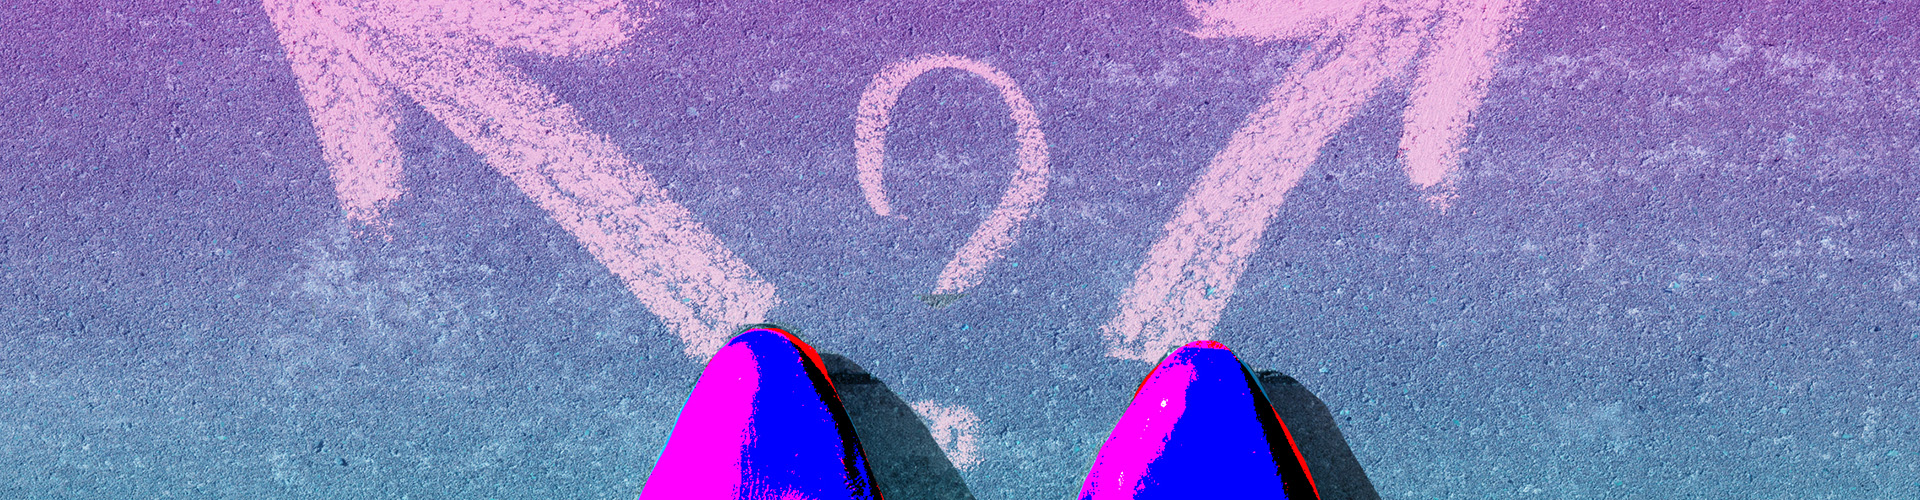 Pair of feet in pointed shoes standing on concrete with chalk arrows and question mark drawn on the ground